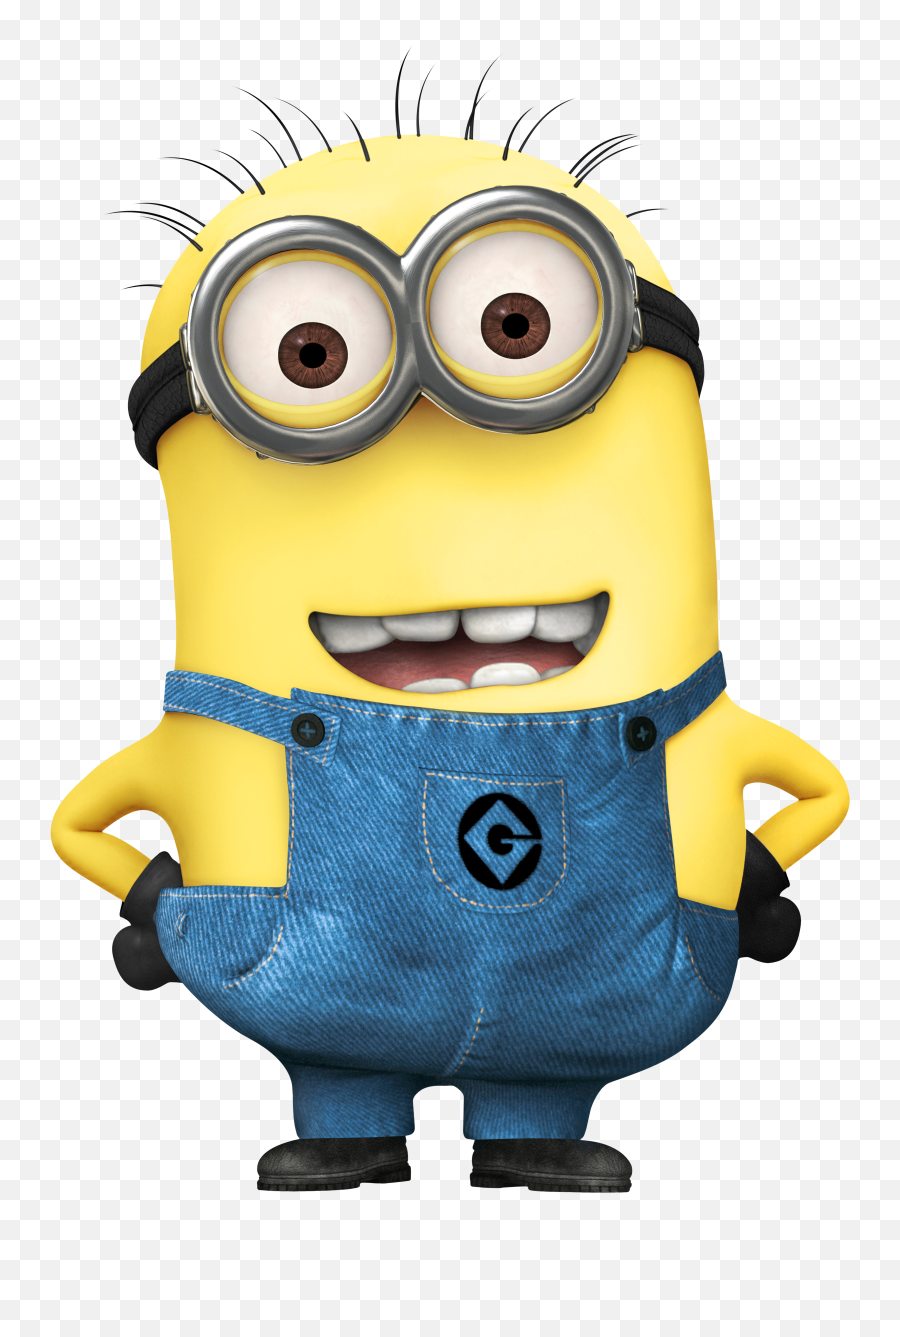 Free Minion Transparent Background Png Minions